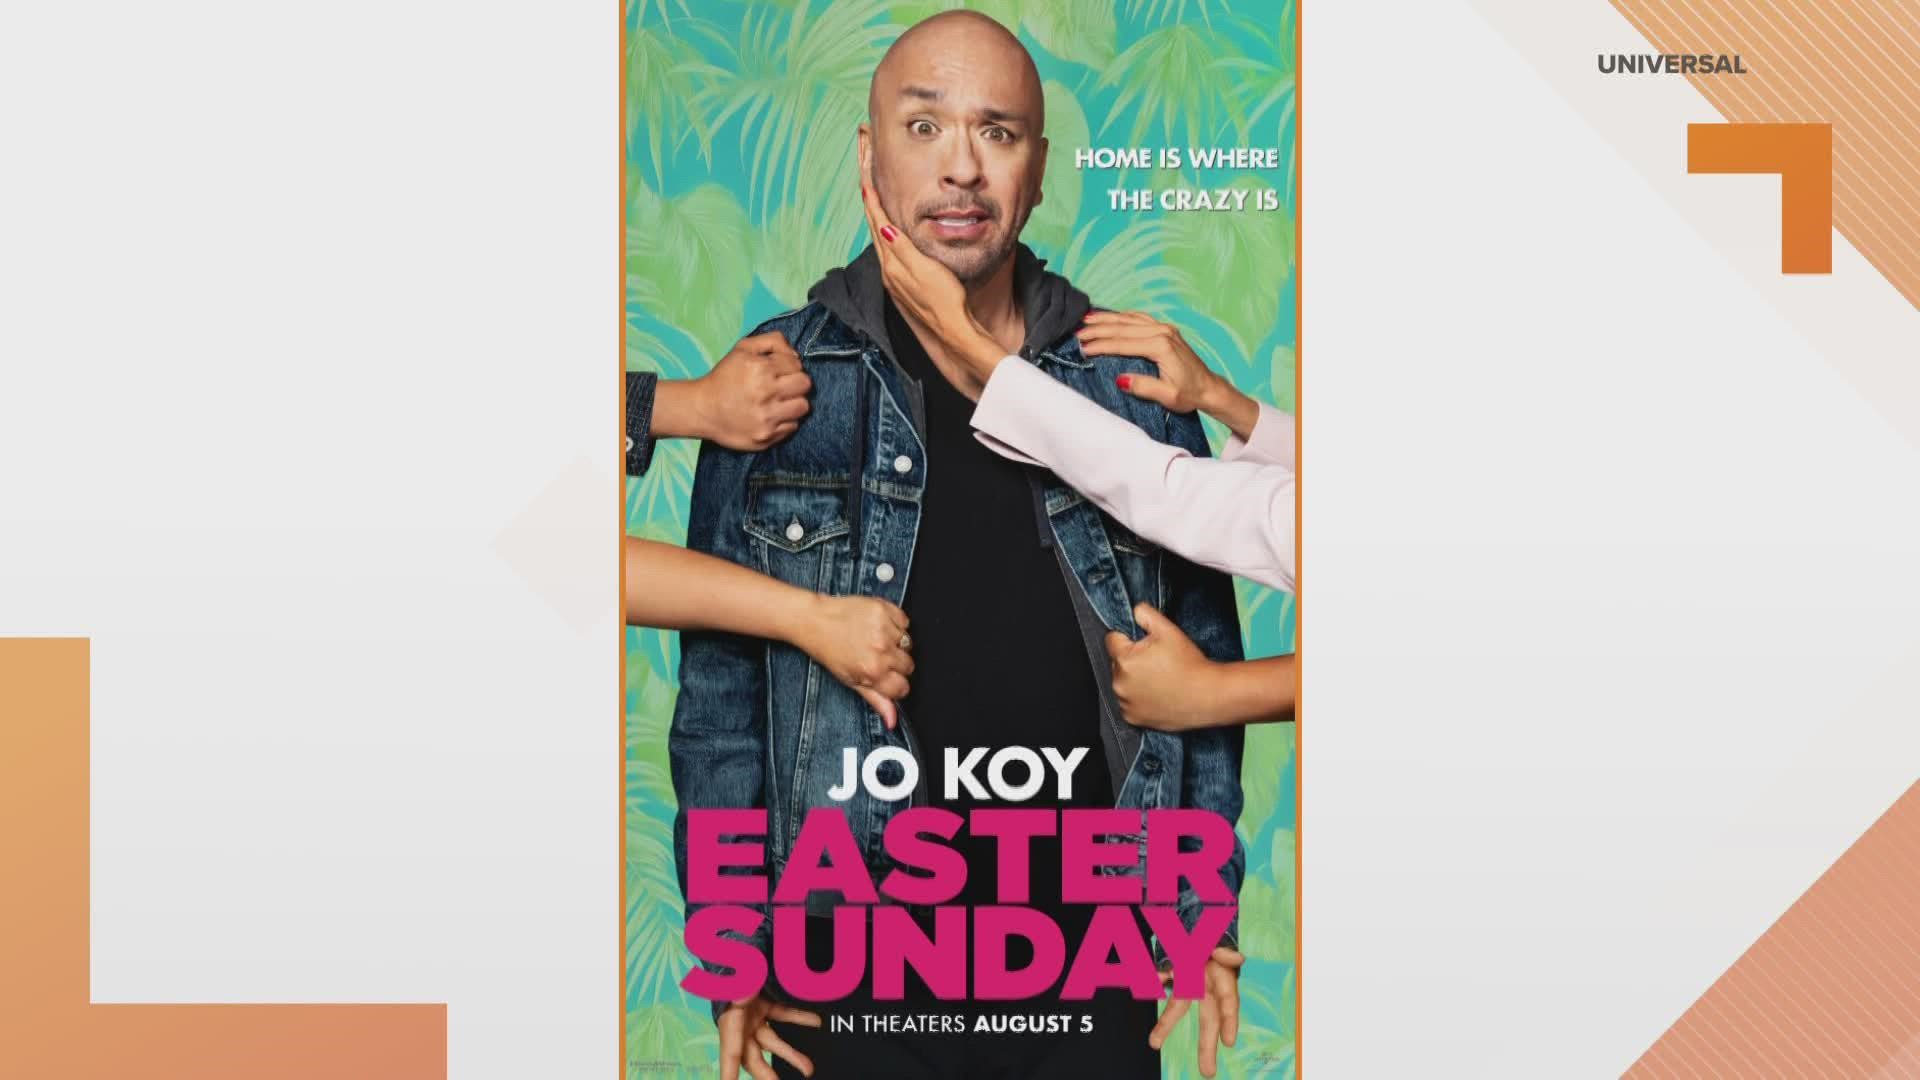 "Easter Sunday" makes its theater debut Friday with stand-up comedian Jo Koy as the lead character. The film is the first film with an all-Filipino cast.